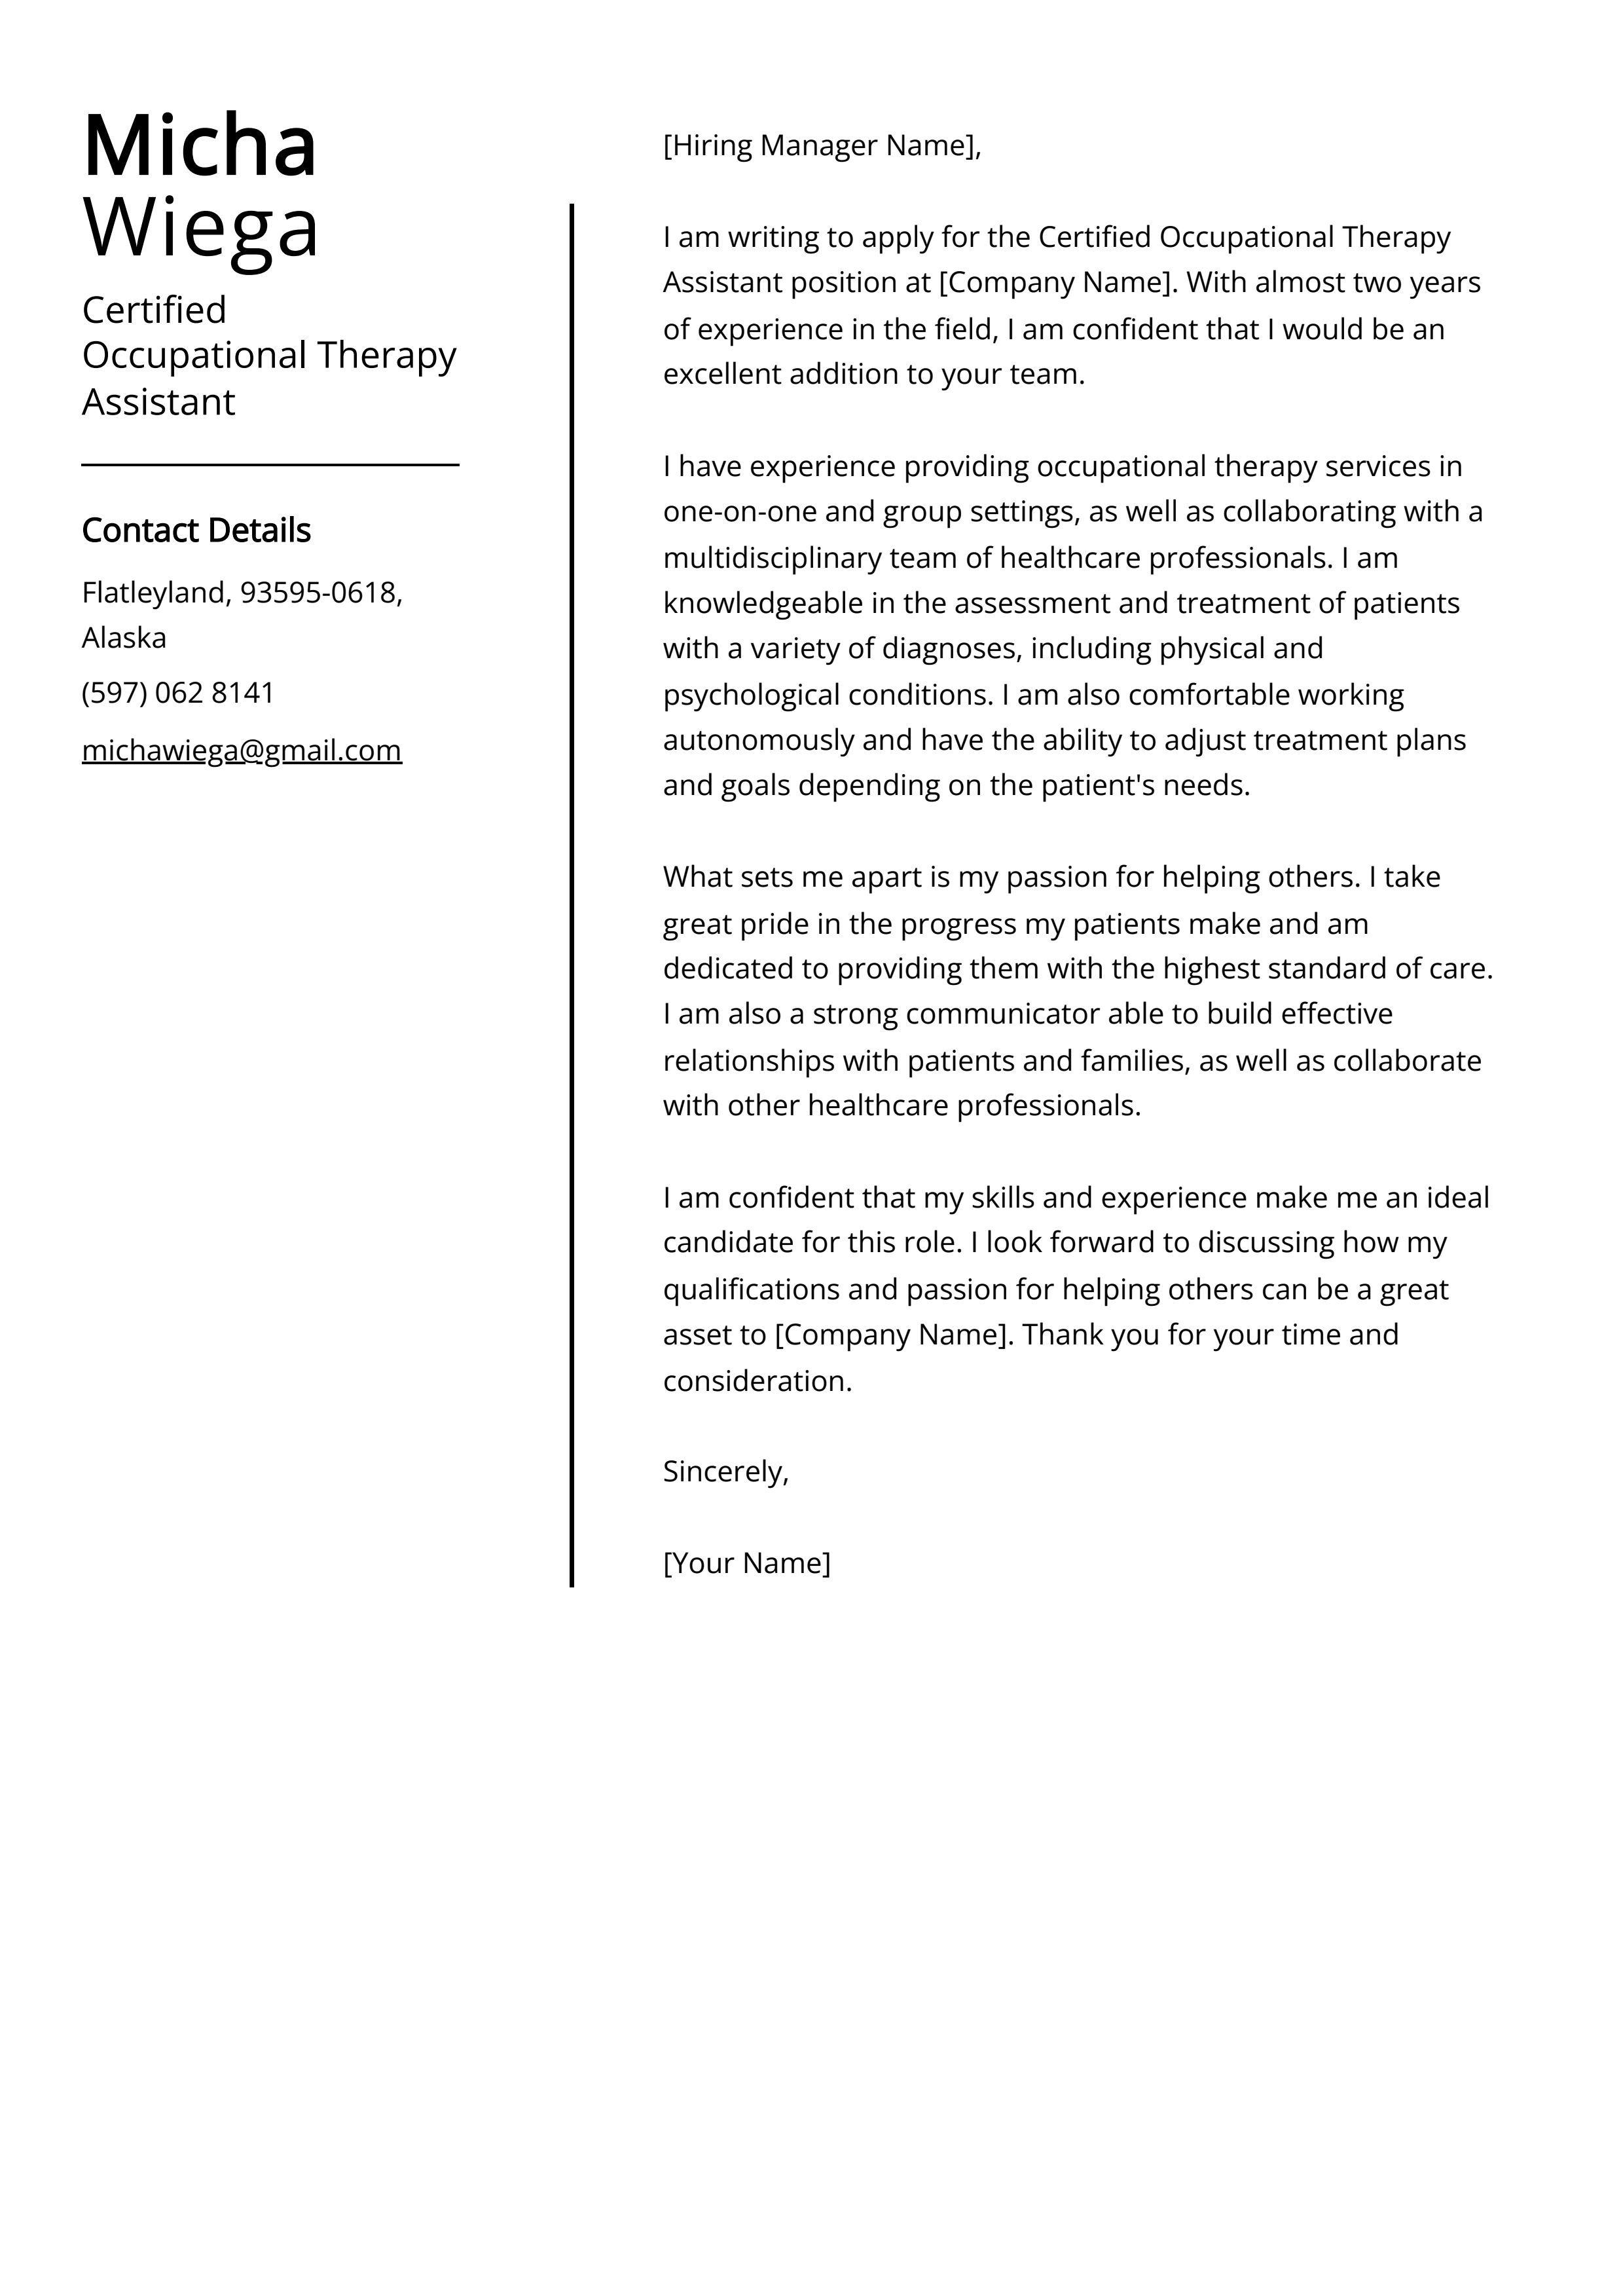 Certified Occupational Therapy Assistant Cover Letter Example